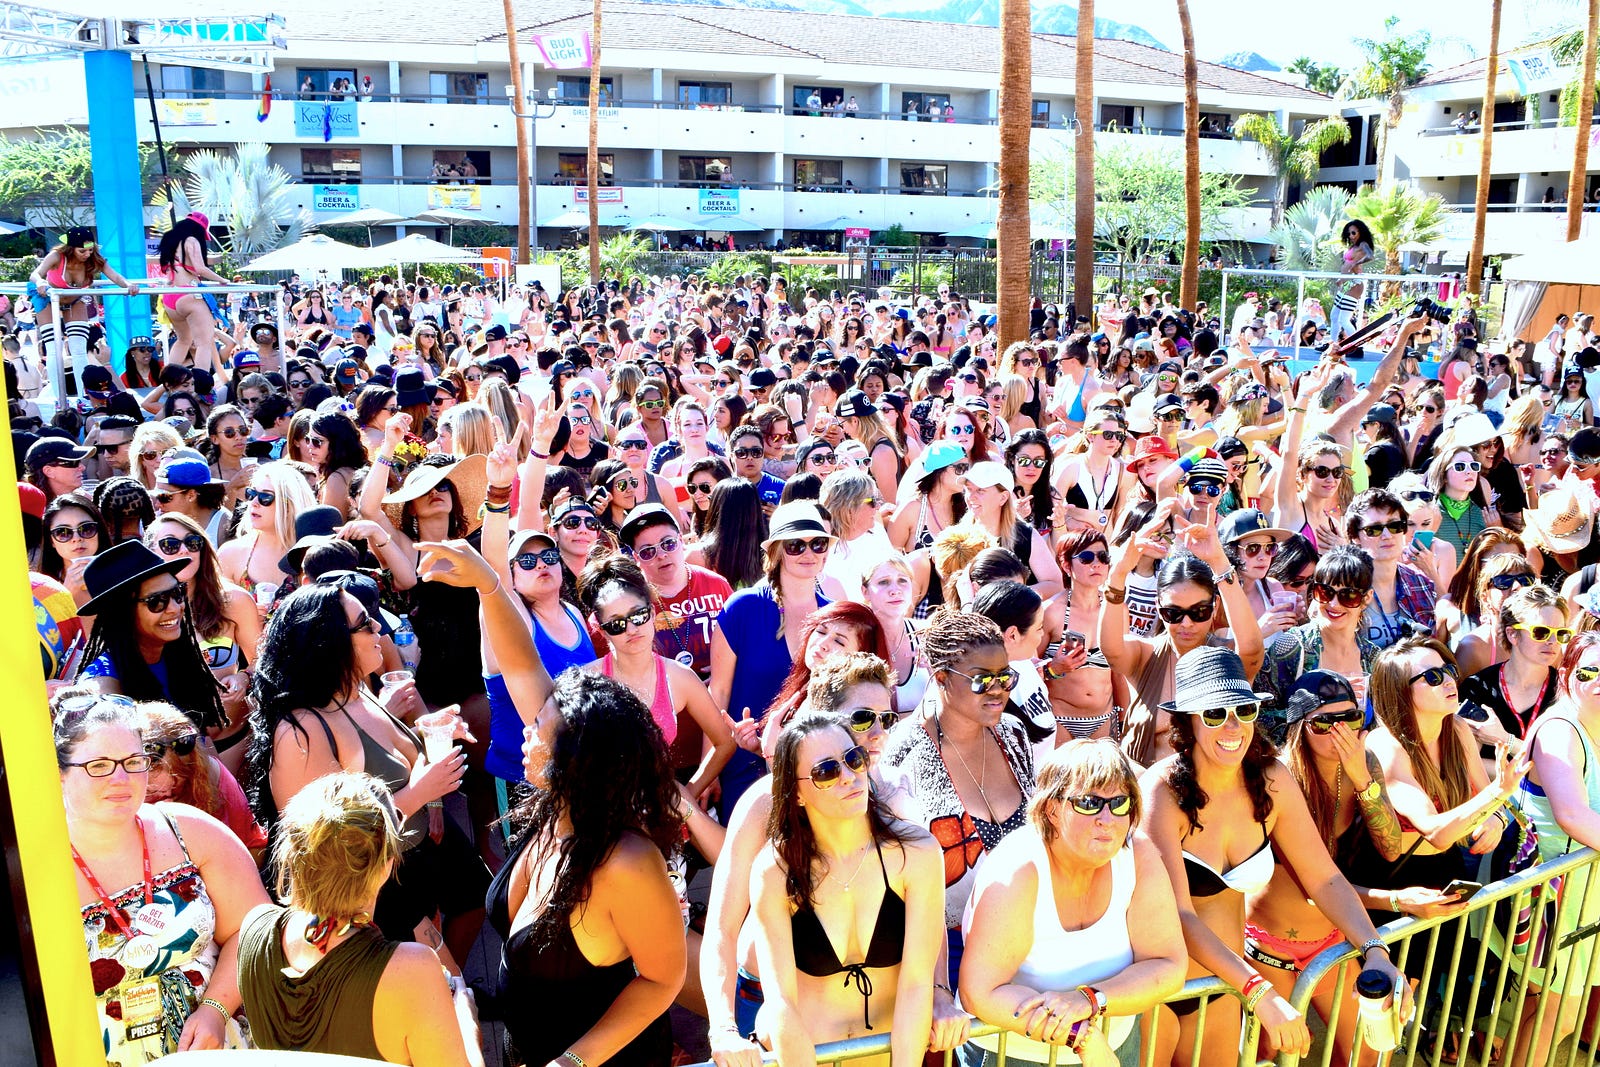 Your Guide To The Biggest Lesbian Party In The World